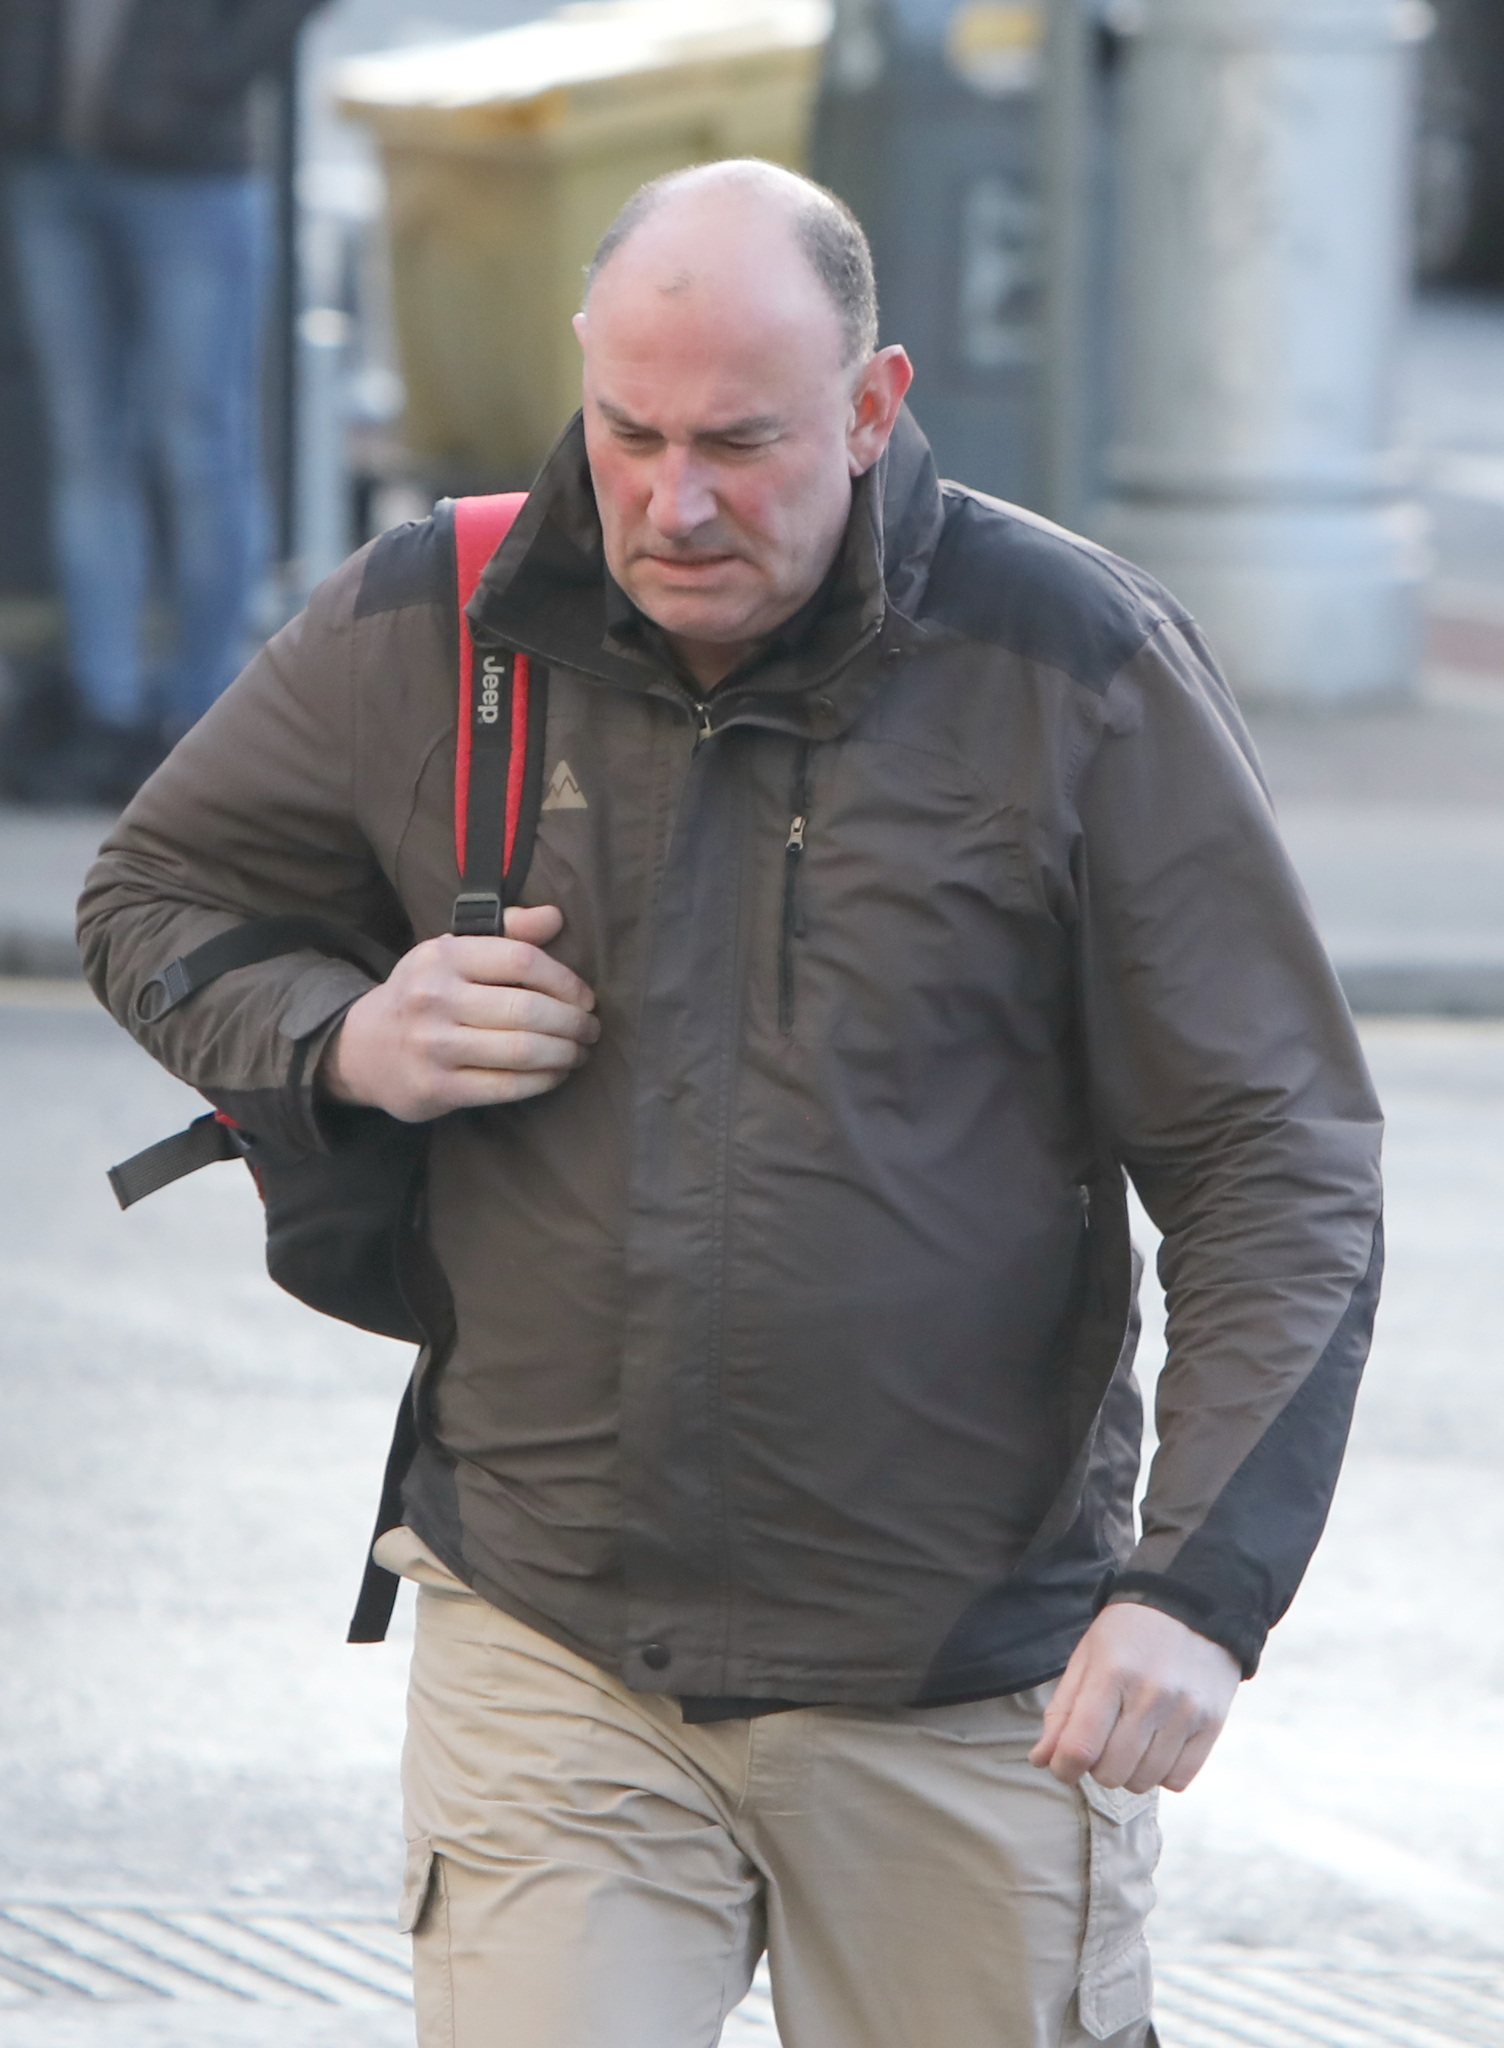 Former member of Garda Reserve jailed for rape and sexual abuse of boy ...